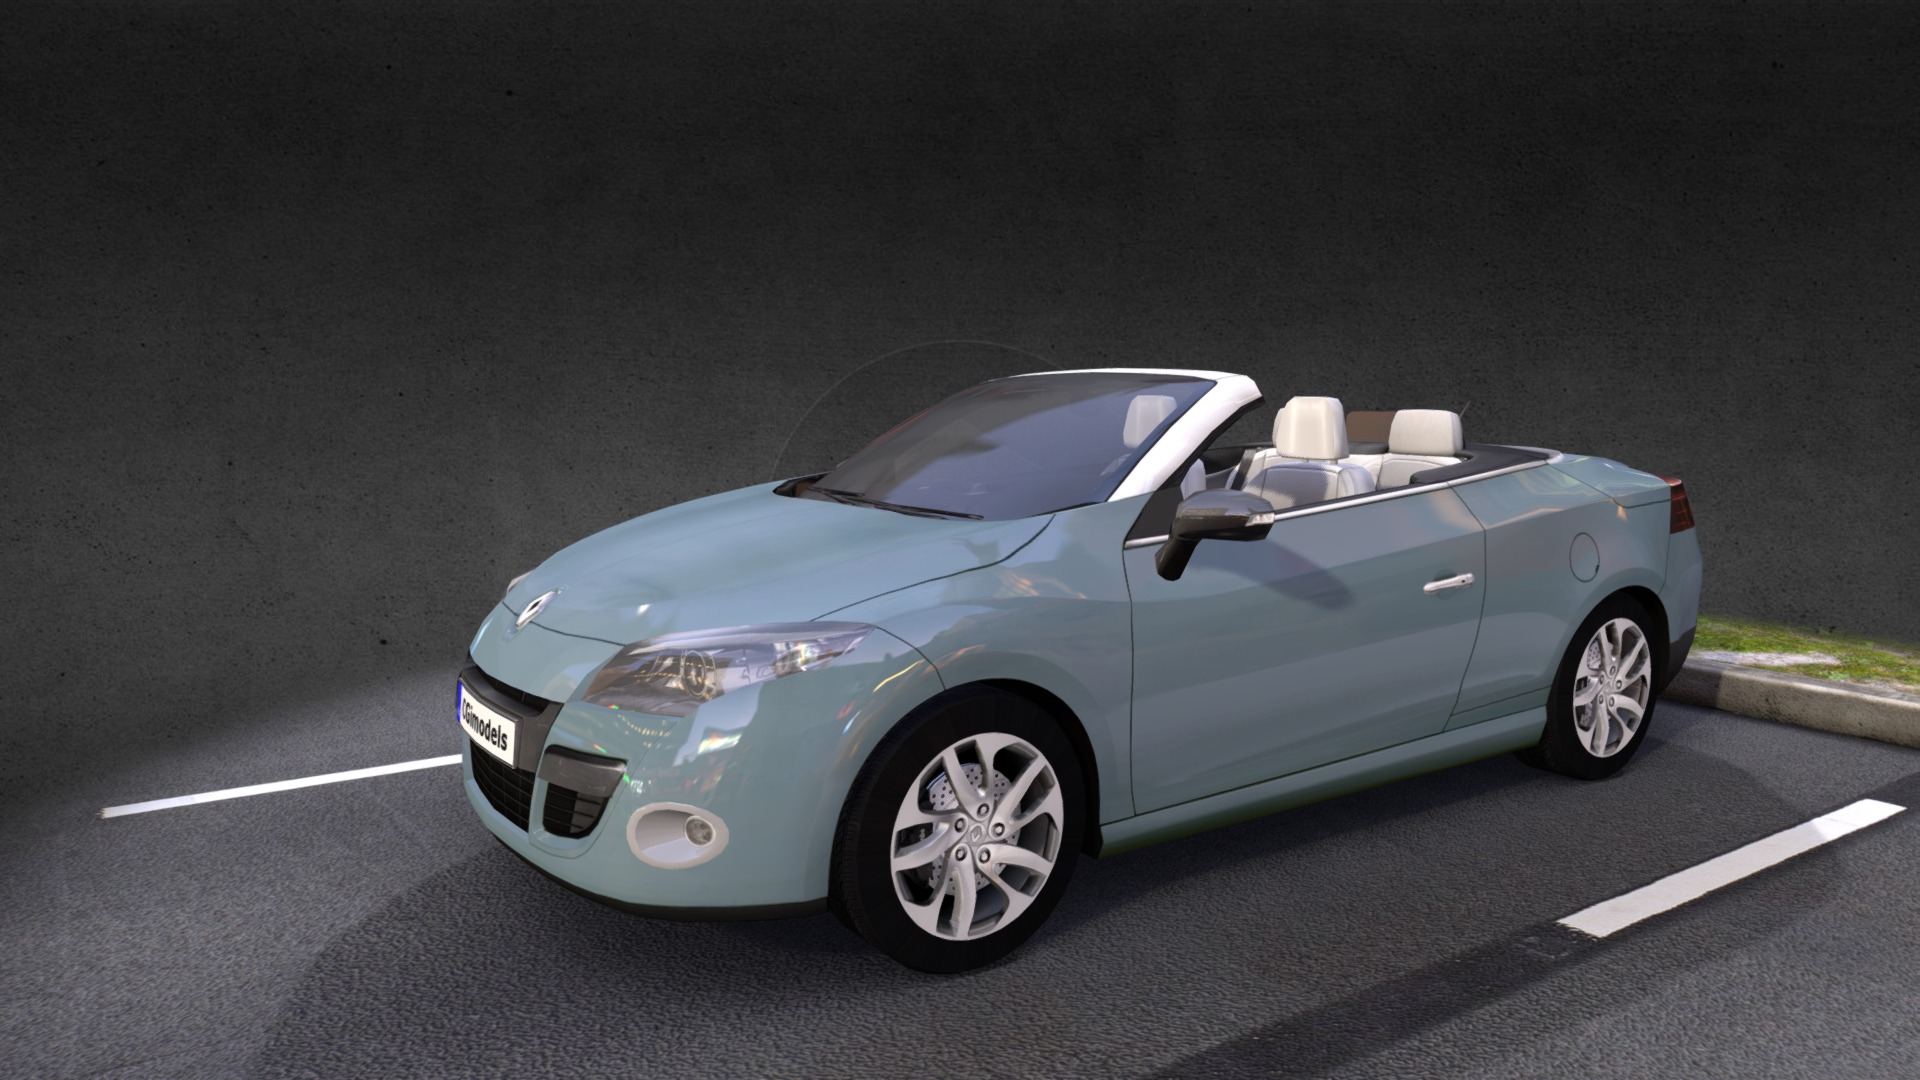 3D model Renault Megane CC - This is a 3D model of the Renault Megane CC. The 3D model is about a car parked in a parking lot.